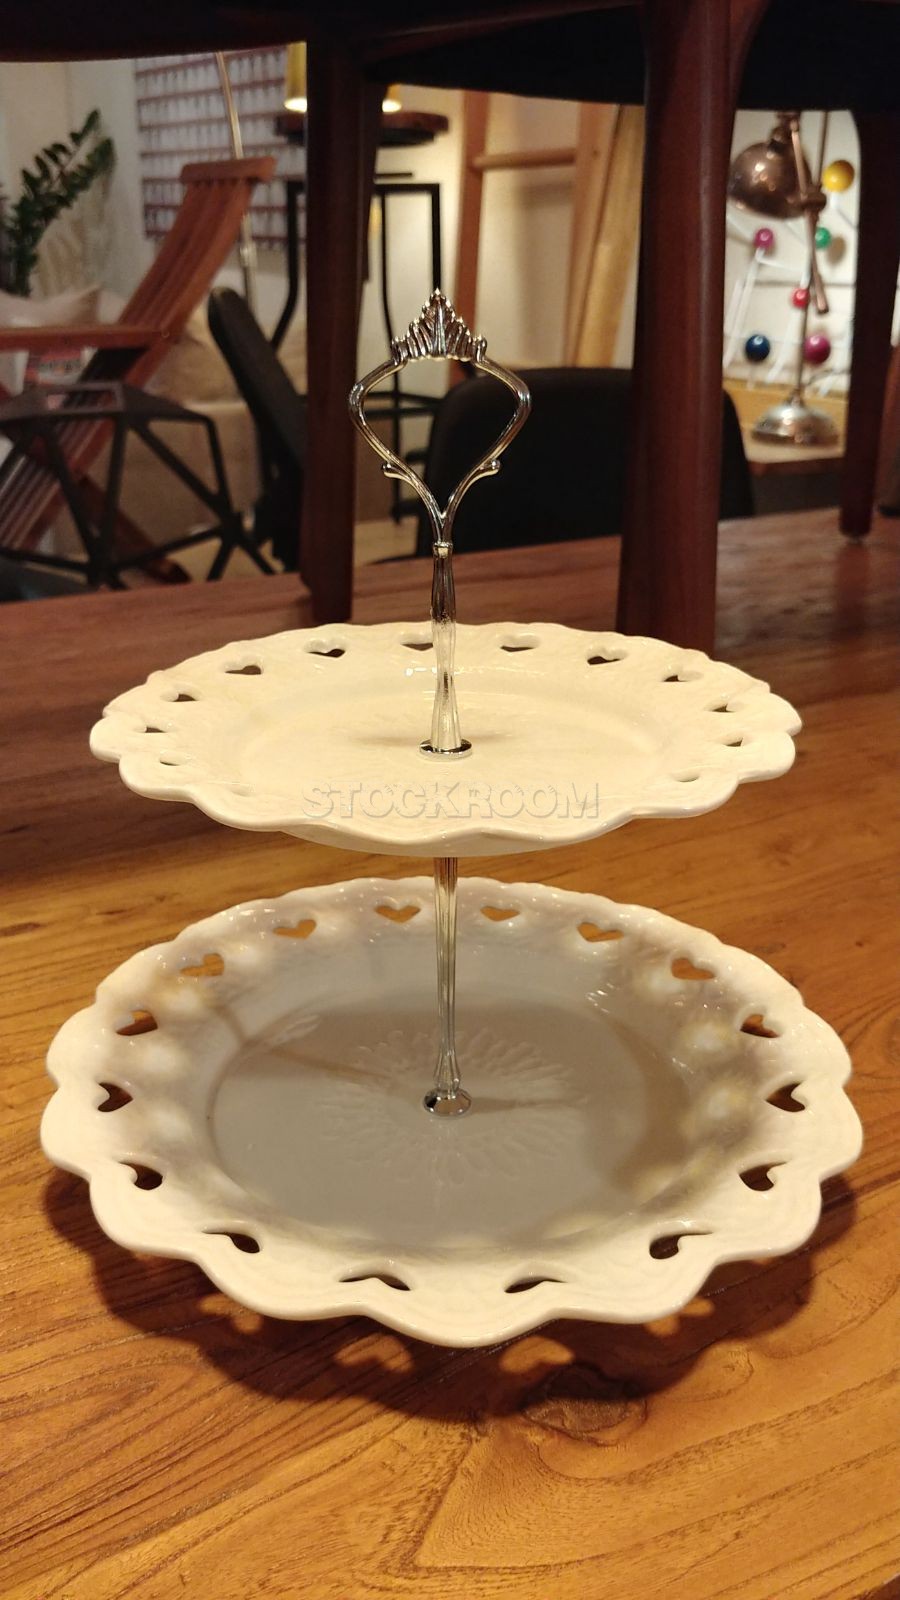 Two layers of cake stand